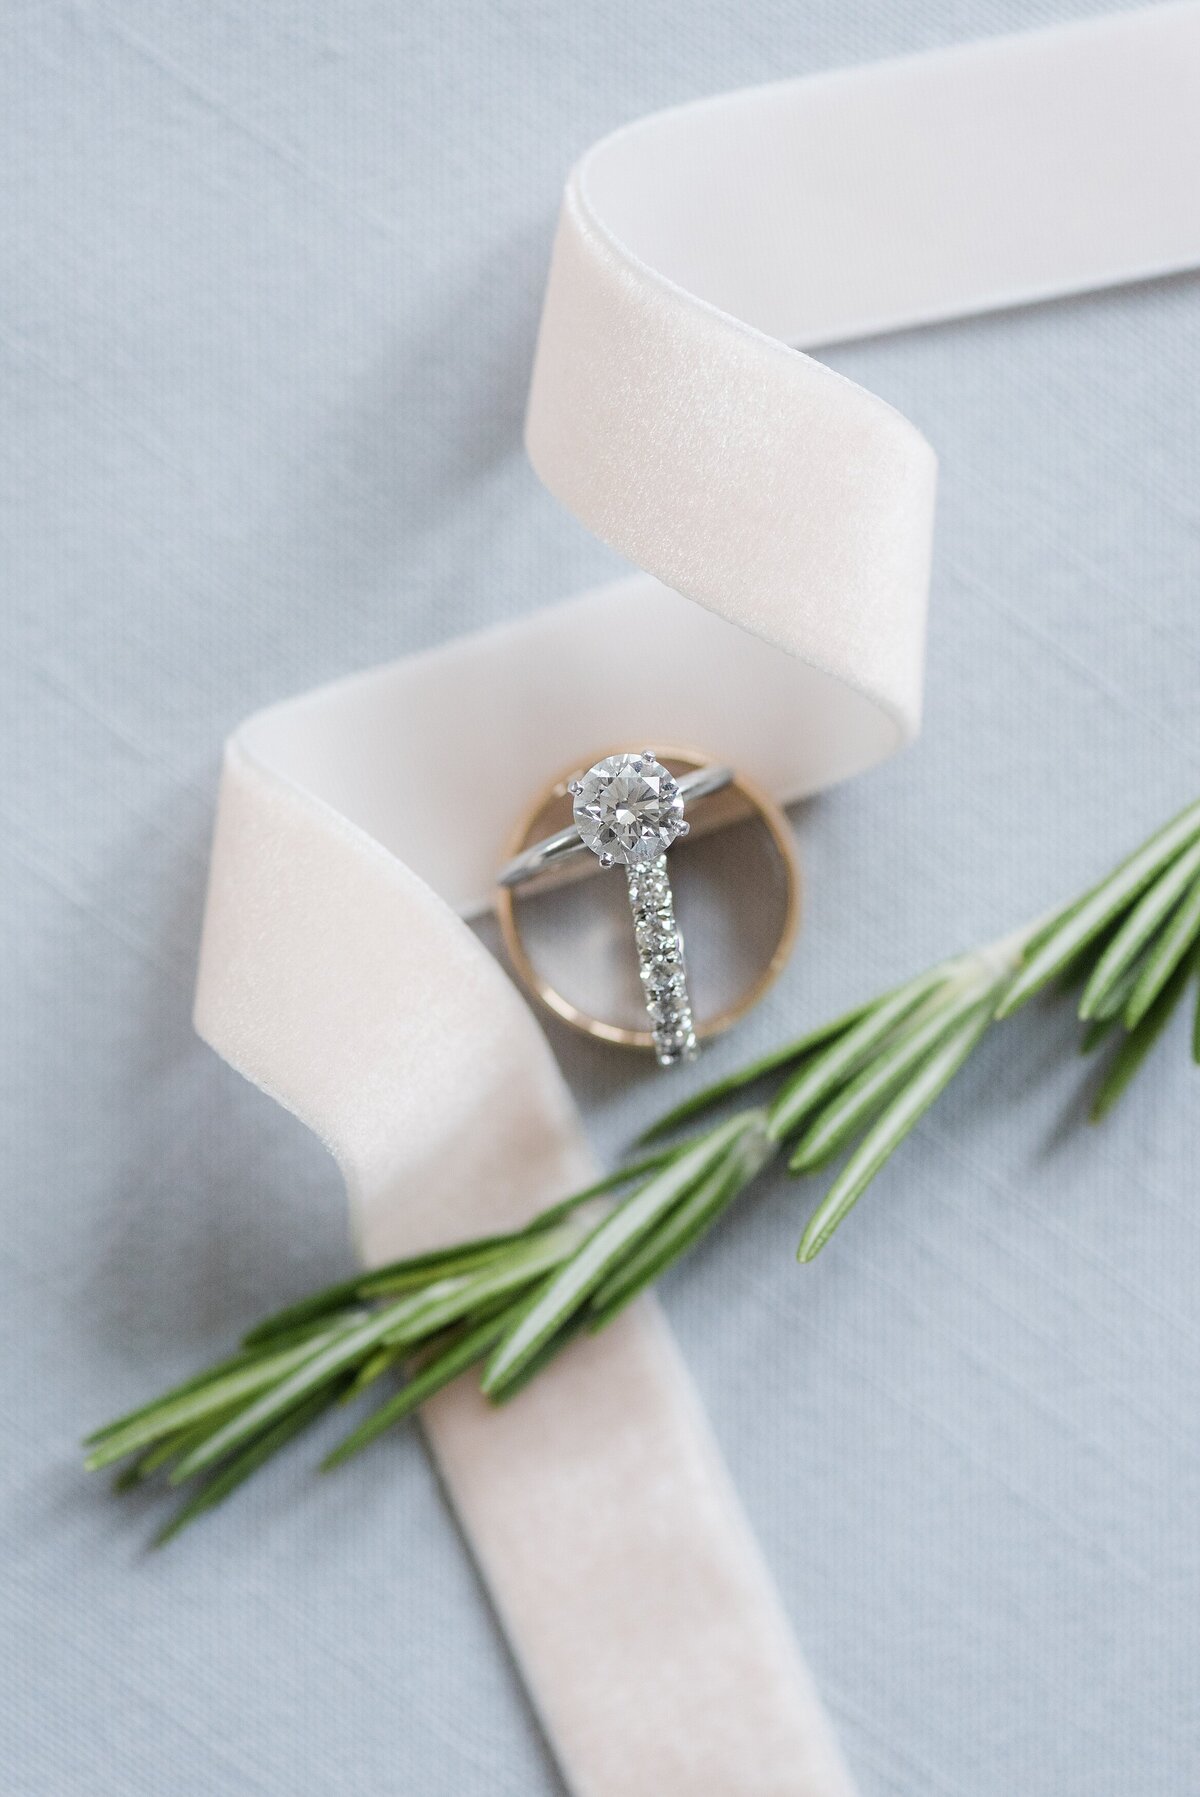 1_wedding-rings styled-with-blush-ribbon-and-rosemary _1033